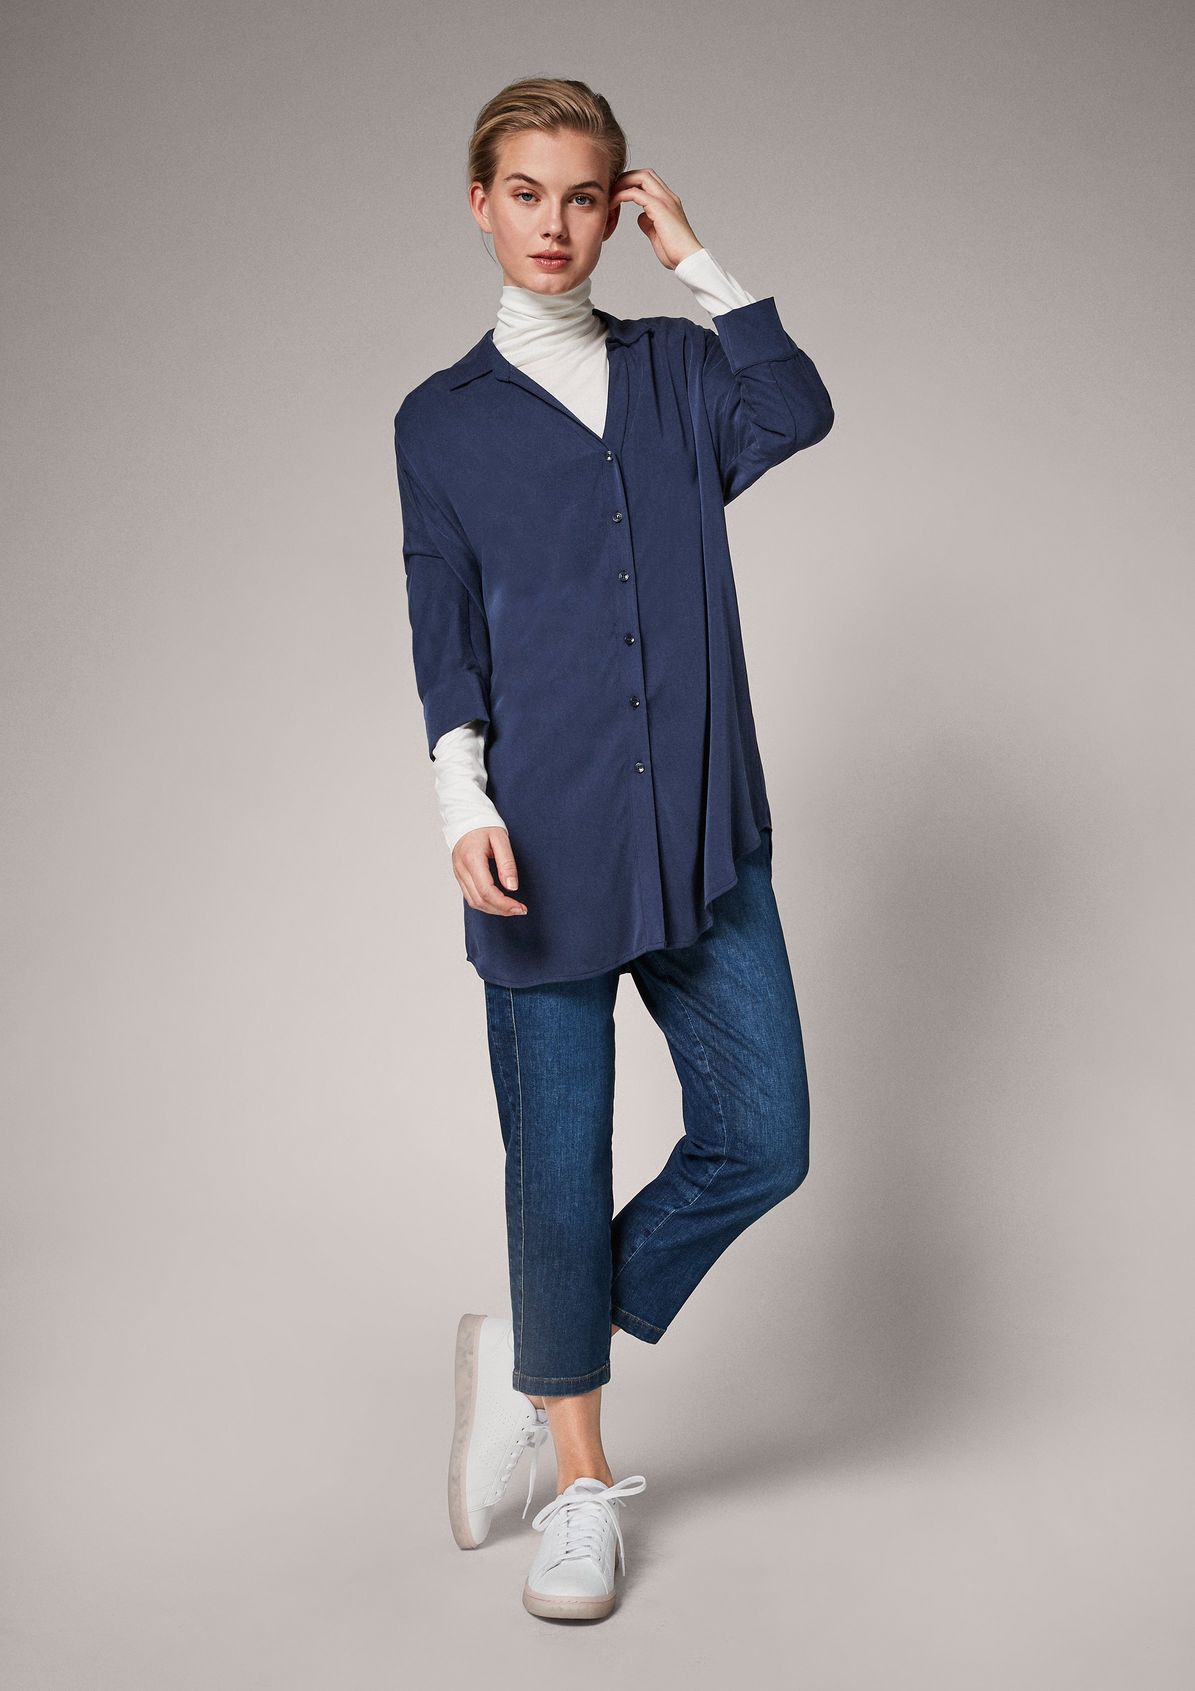 Modal blouse with batwing sleeves from comma